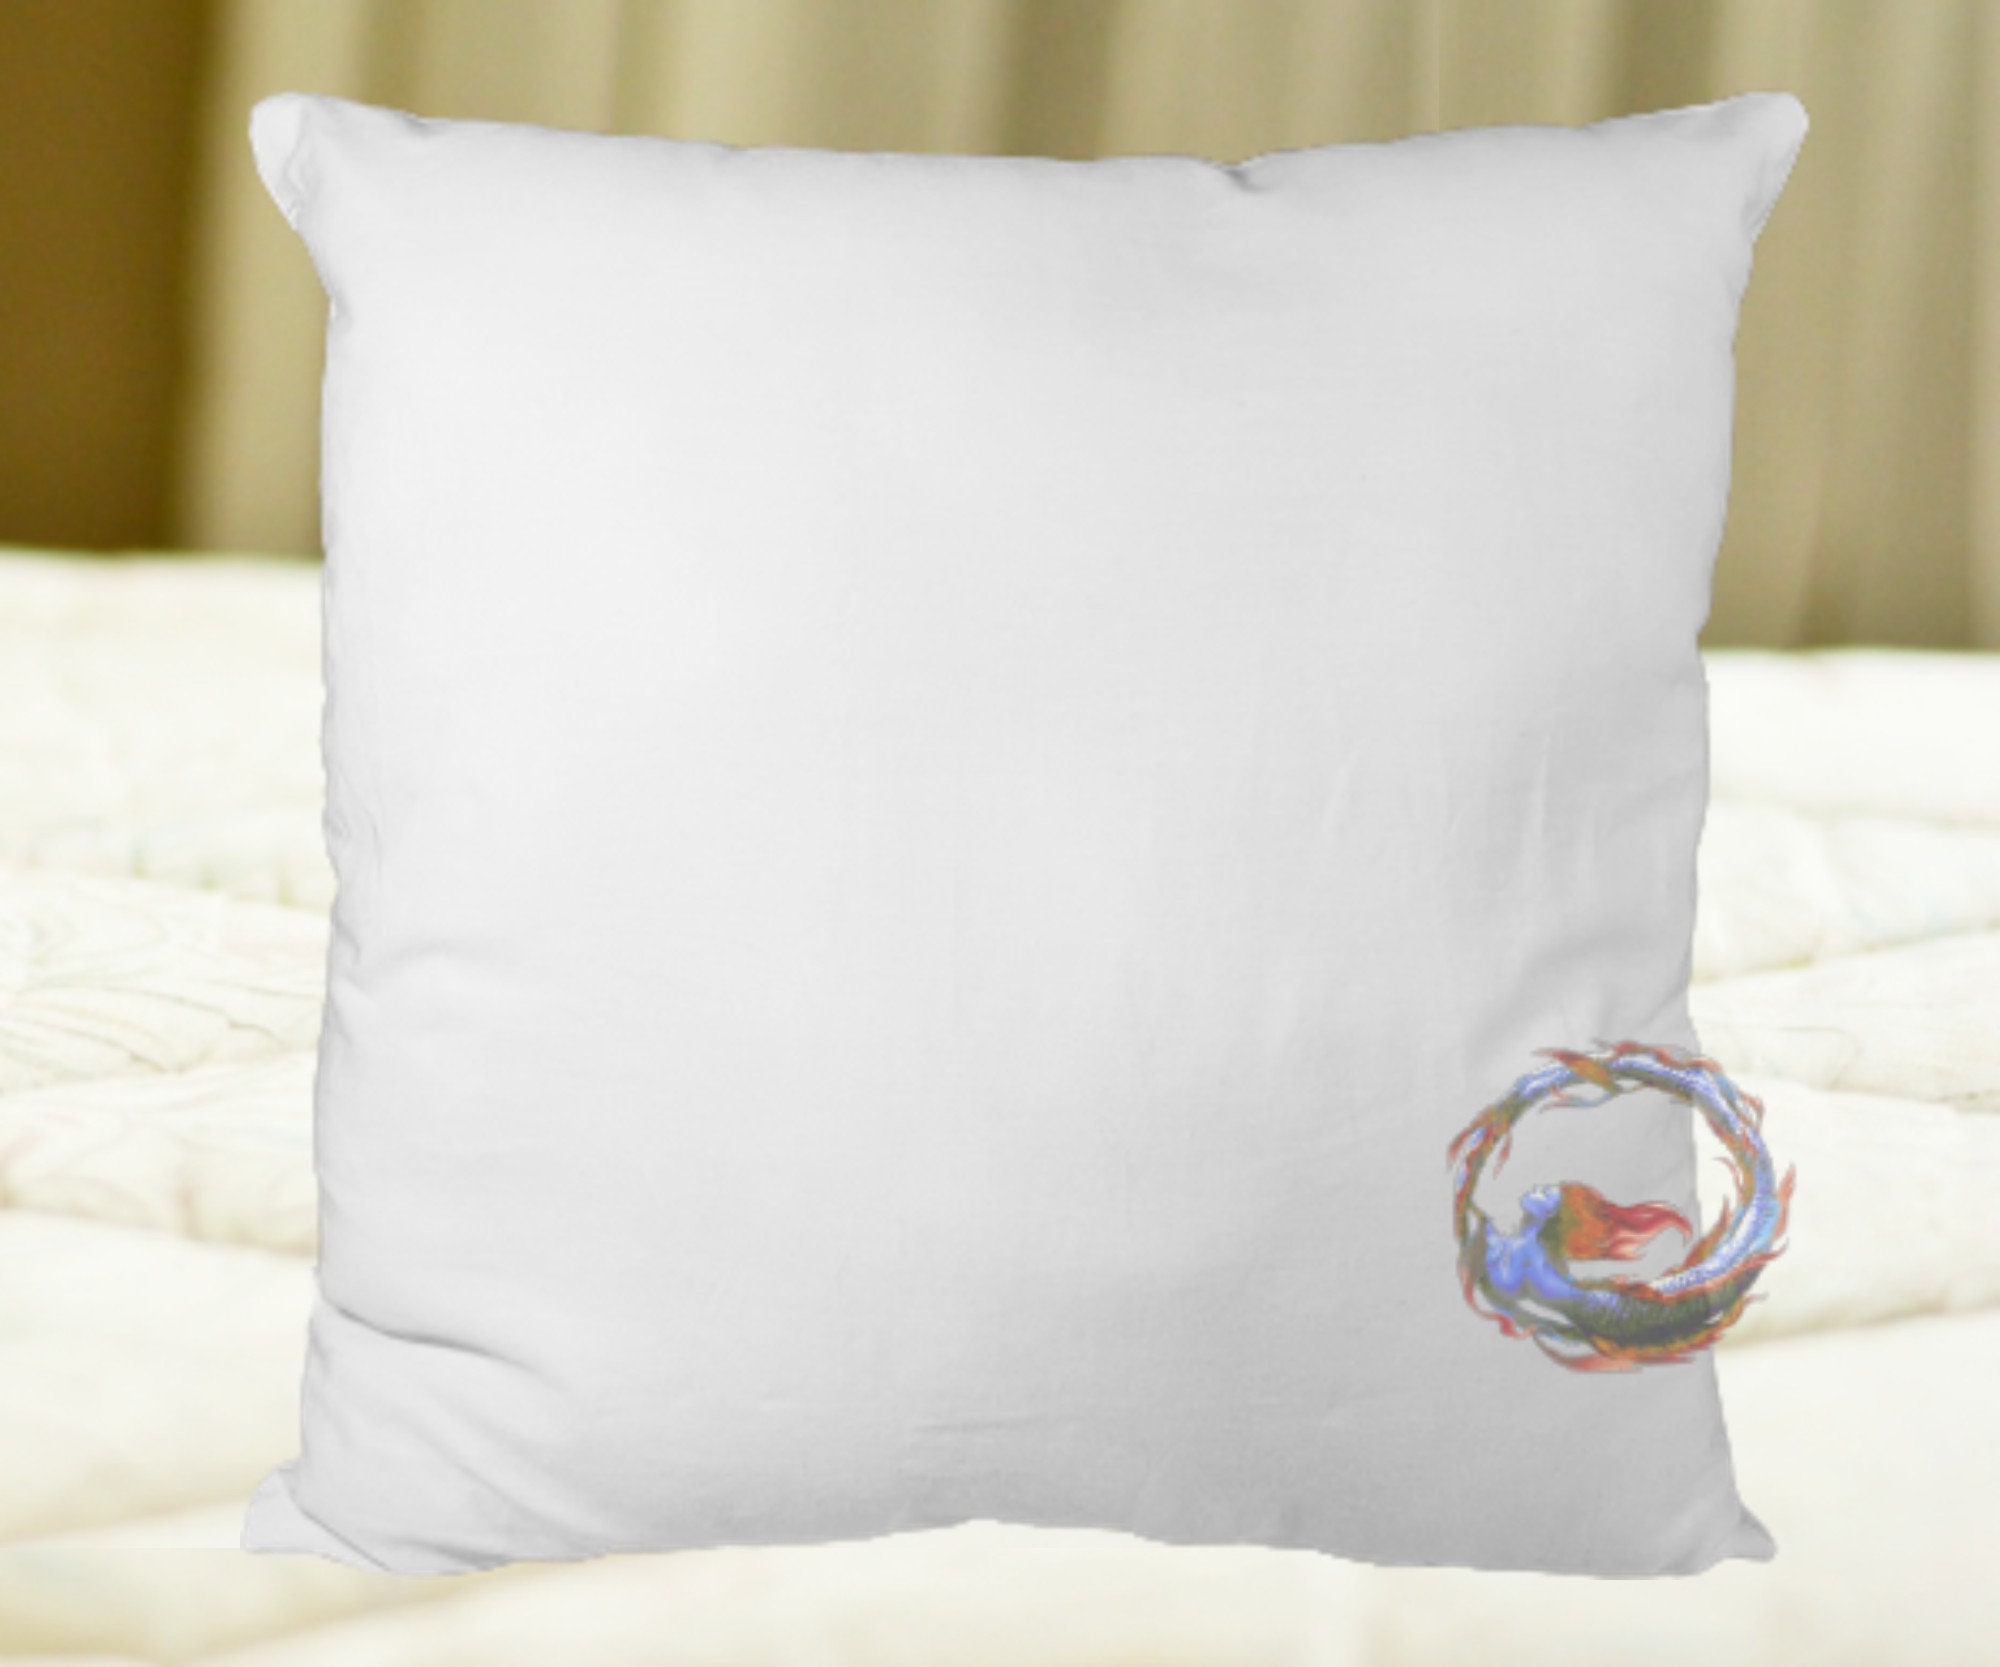 Cotton Cover Hypoallergenic Polyester Filled Pillow Insert | 12x12 | 14x14 | 16x16 | 18x18 | 20x20 - UniikPillows 12x12